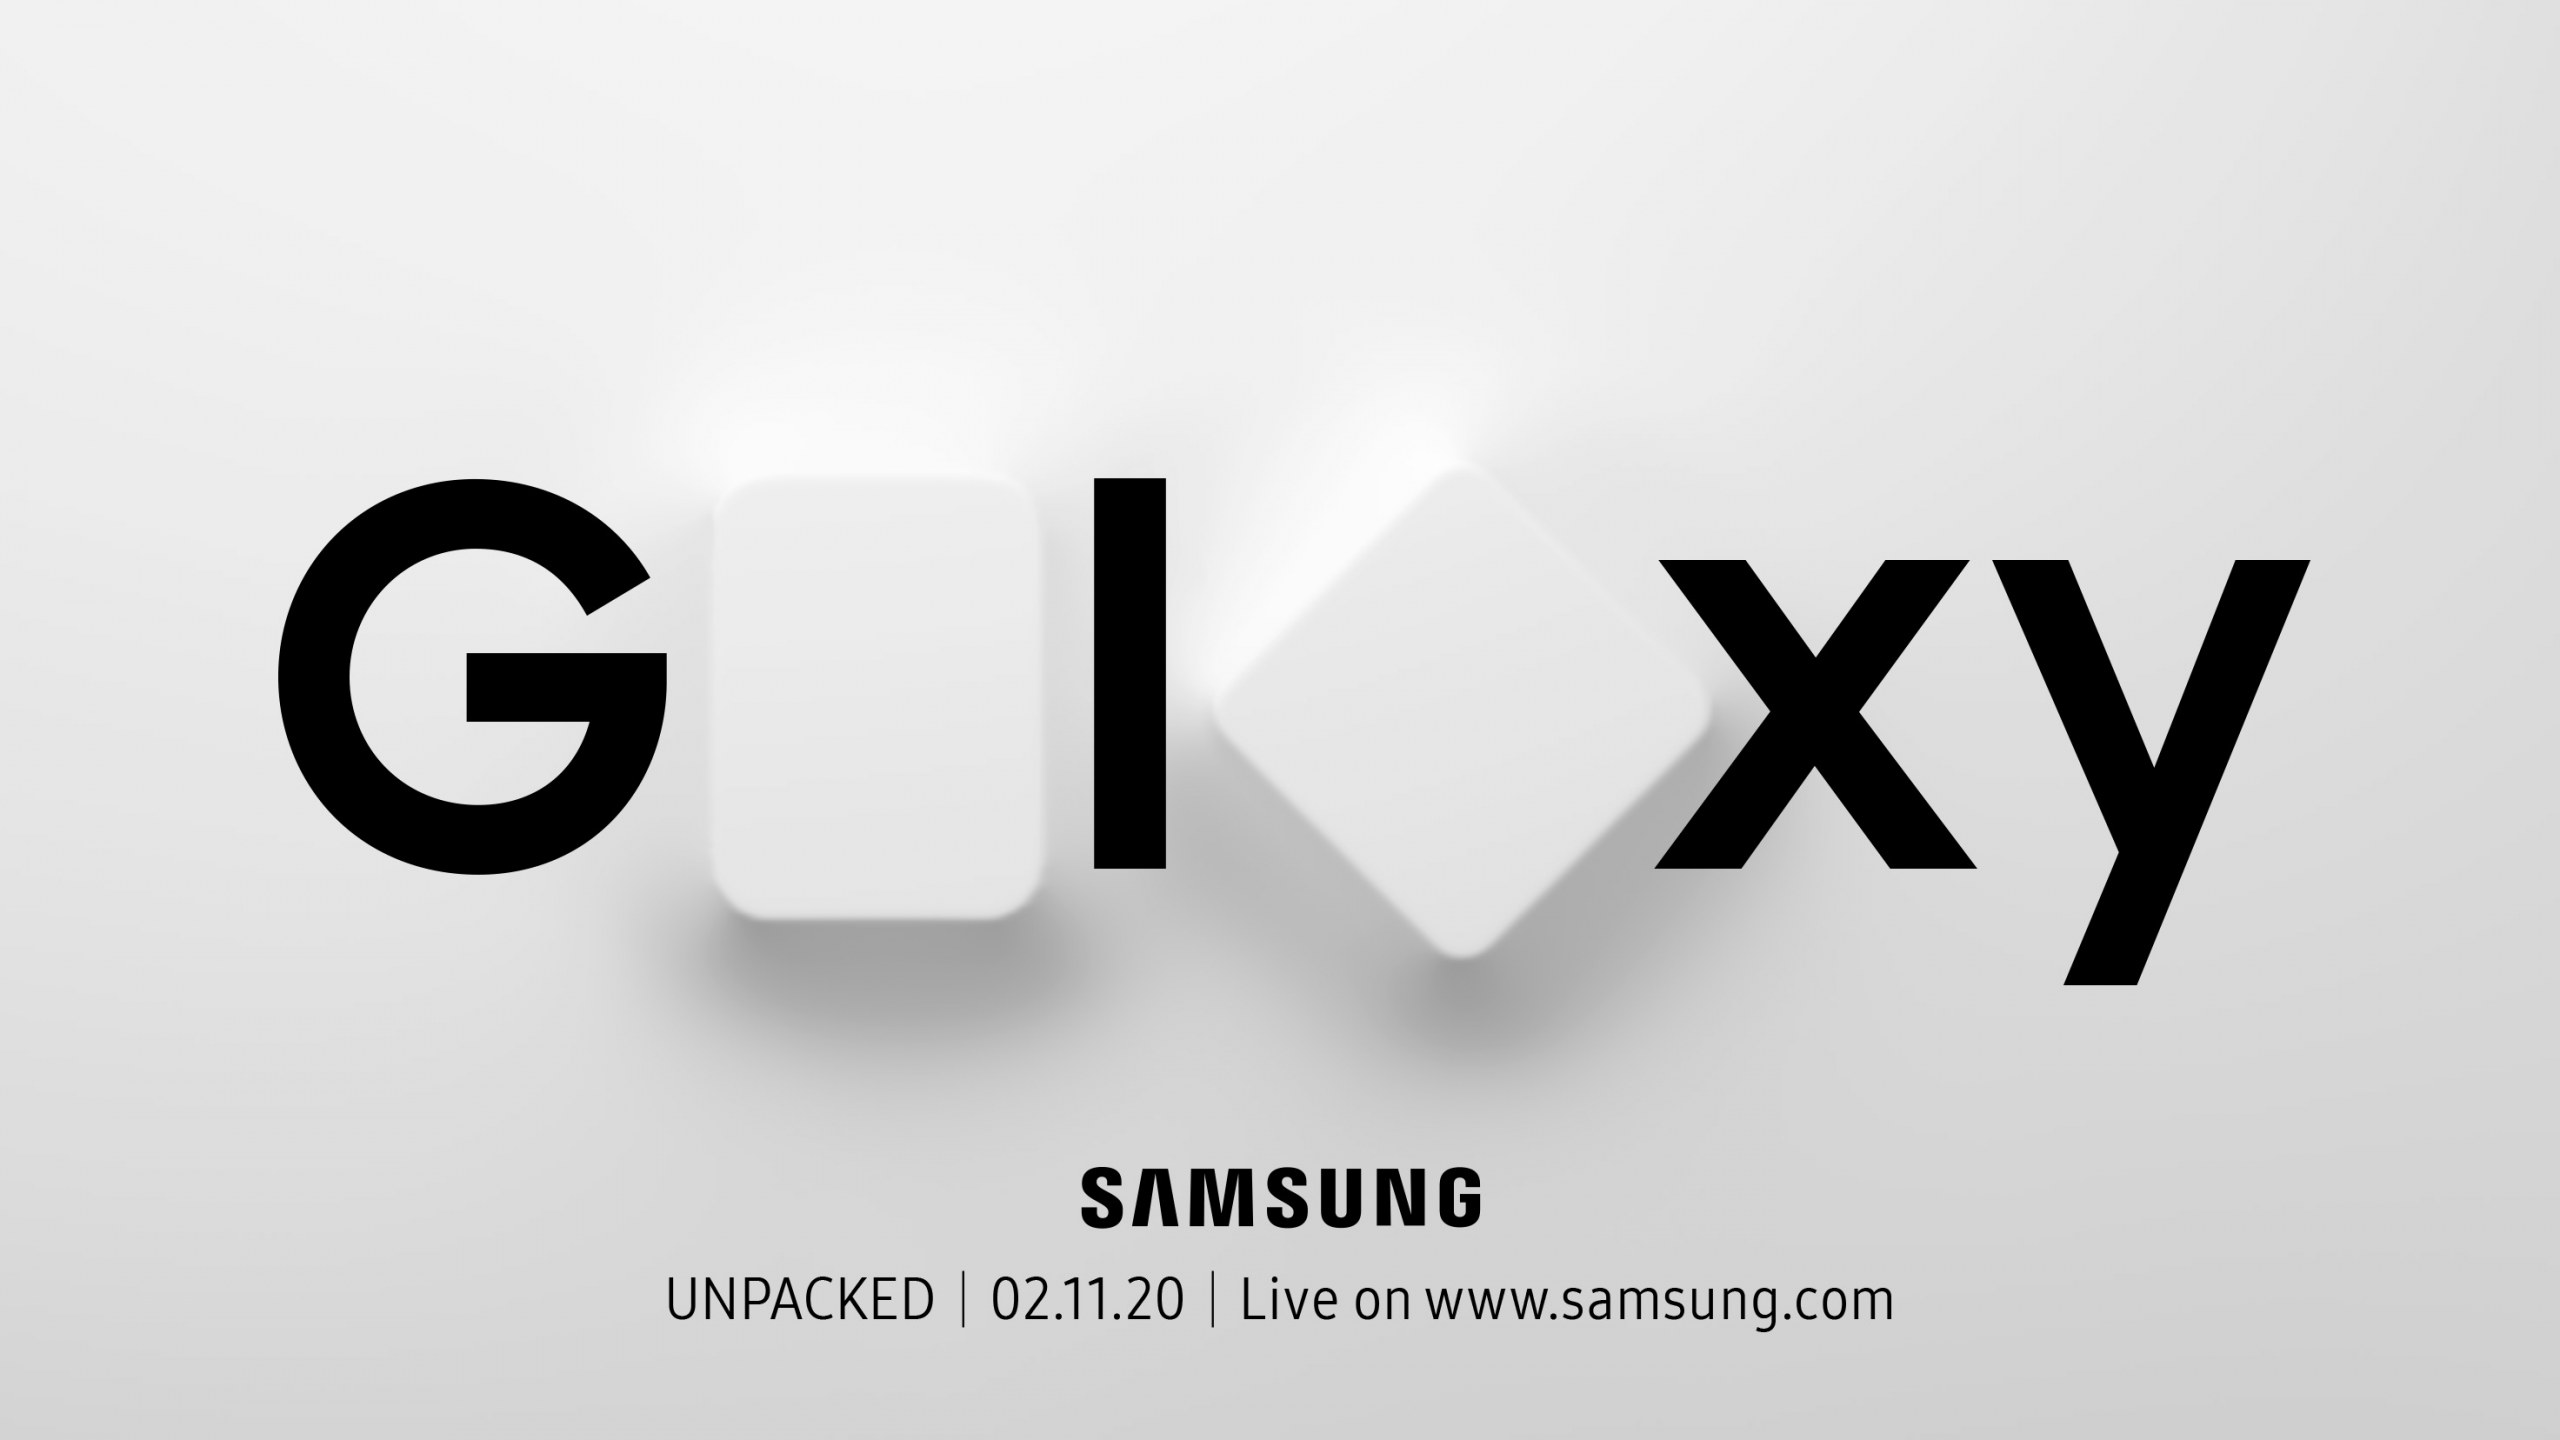 Samsung's next Galaxy flagship will be announced on February 11